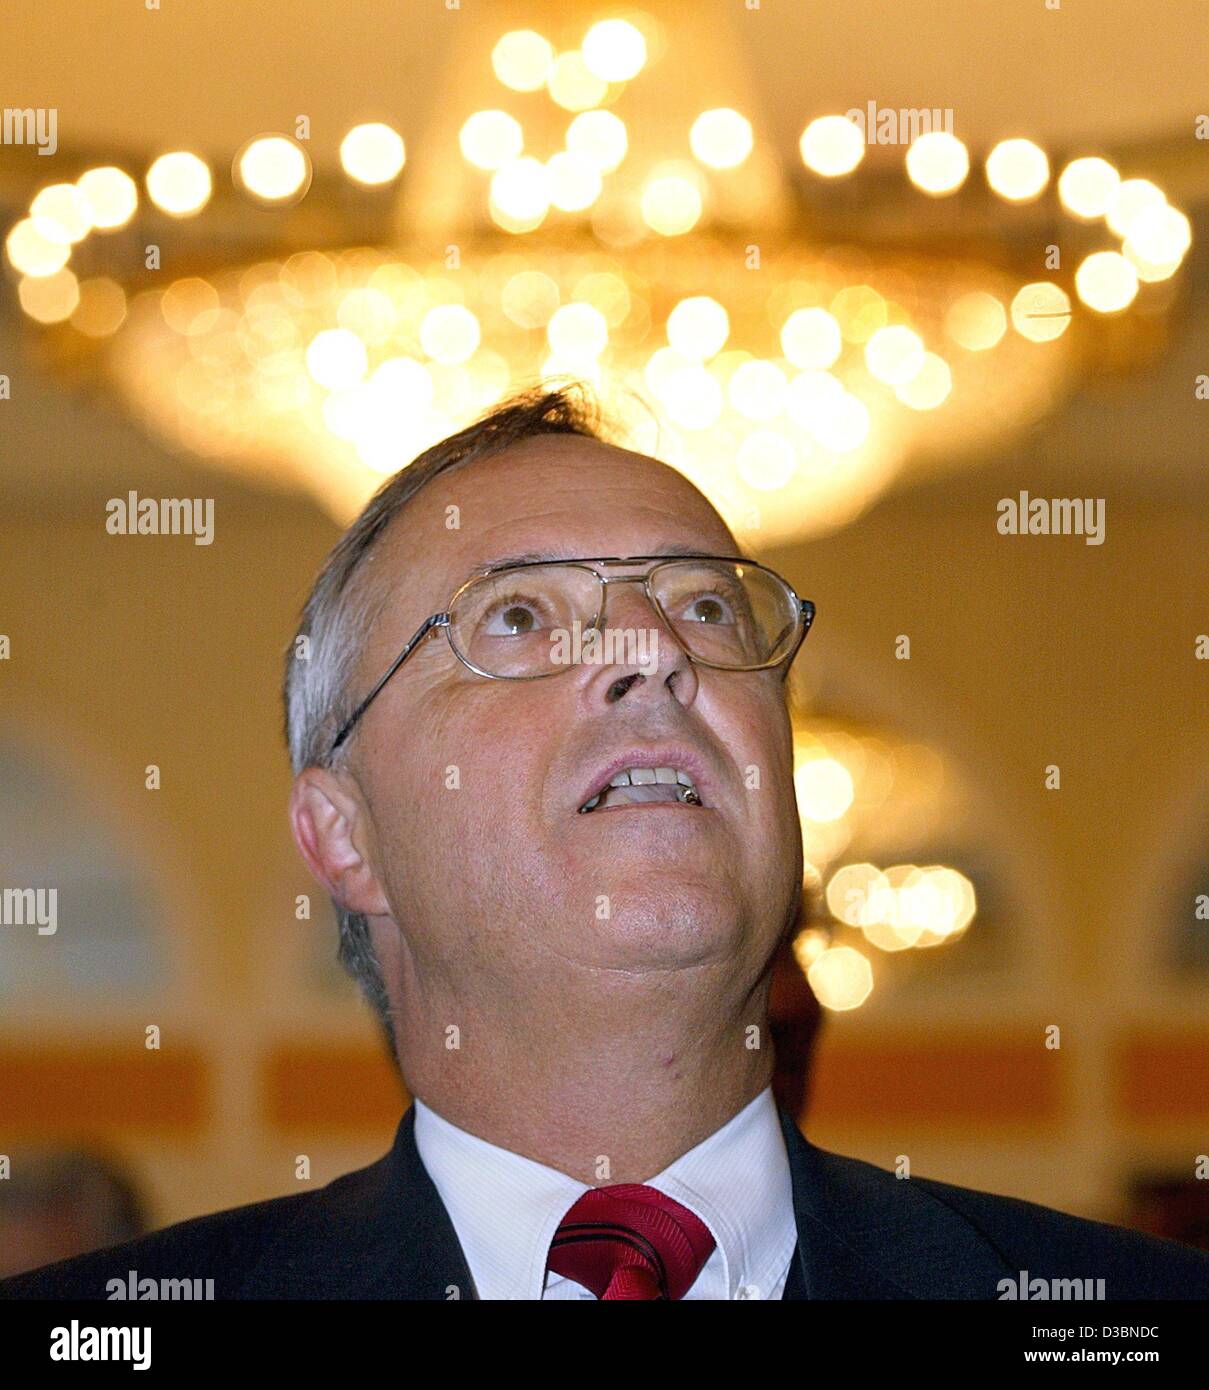 (dpa) - German Finance Minister Hans Eichel stand underneath a chandelier which gives the impression that he were wearing a gloriole, in Berlin, 21 May 2003. Slumping GDP projections last week led Eichel to admit Germany will suffer a massive tax revenue shortfall in the coming years and that Berlin Stock Photo